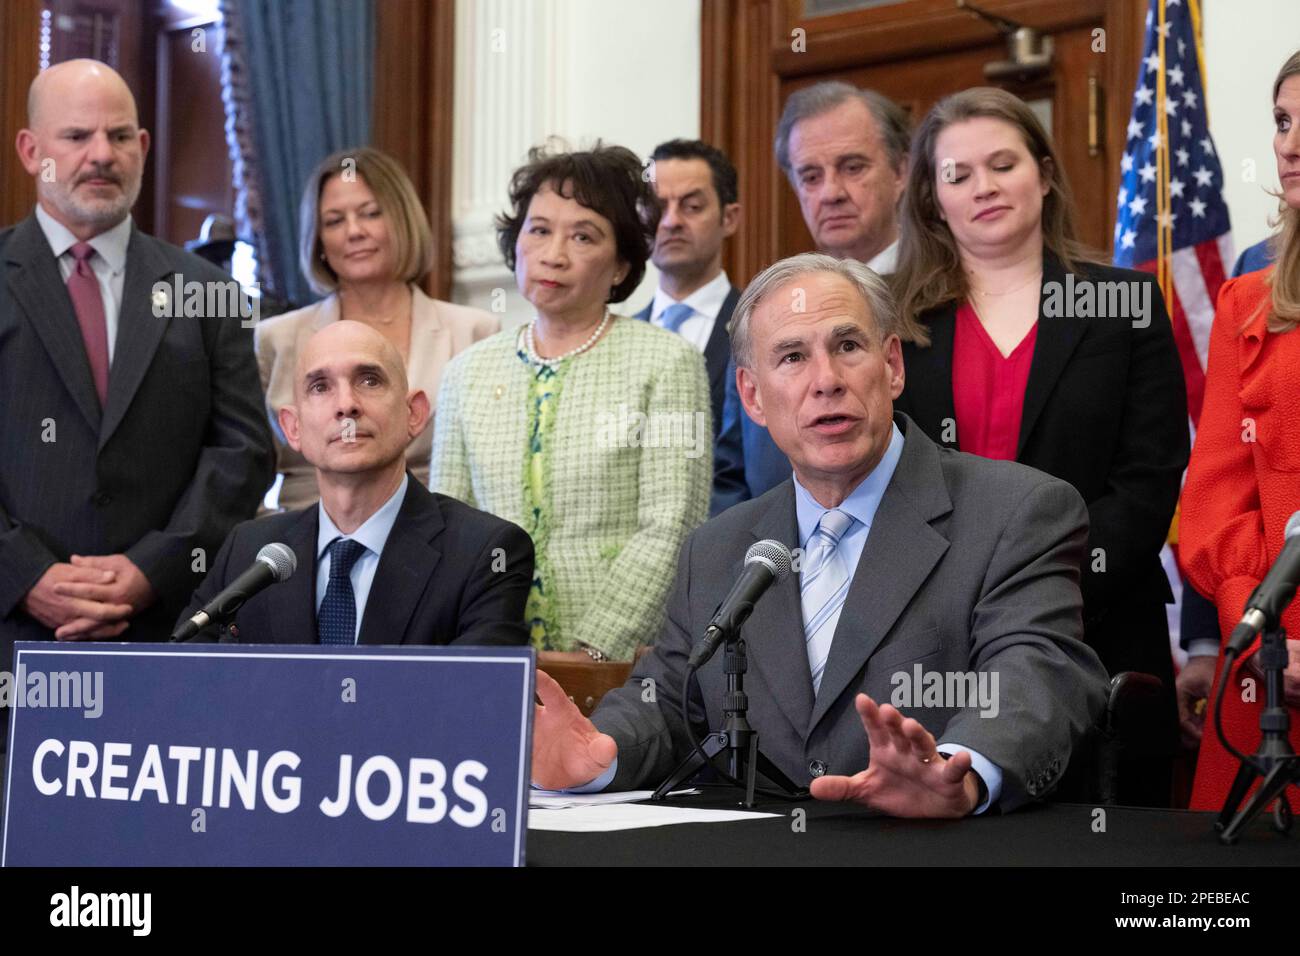 Texas, USA. 15th Mar, 2023. Texas Governor GREG ABBOTT, r, along with Texas elected officials, educators and business representatives, holds a press conference supporting the Texas CHIPS Act. The Creating Helpful Incentives to Produce Semiconductors (CHIPS) Act, if passed, would focus on Texas research and development efforts in winning semiconductor chip projects. Credit: Bob Daemmrich/Alamy Live News Credit: Bob Daemmrich/Alamy Live News Stock Photo